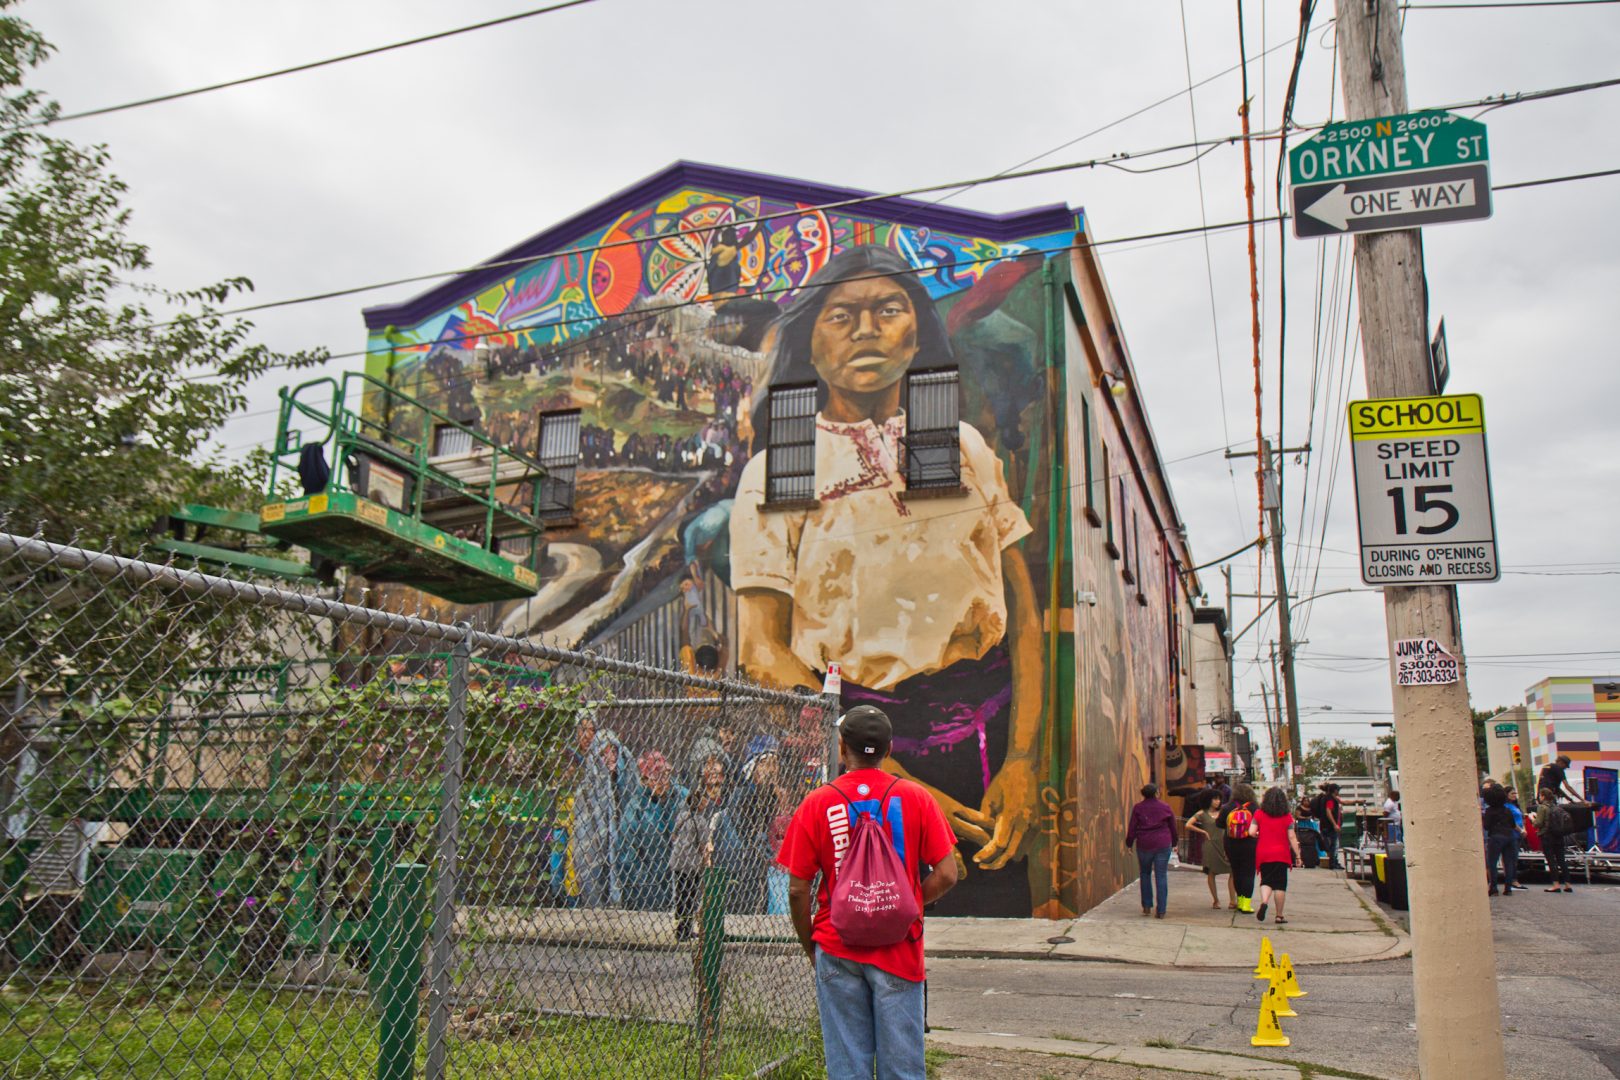 Artists Ian Pierce and Betsy Casañas created “Sanctuary City, Sanctuary Neighborhood,” a mural highlighting immigration issues in society located at 5ht and Huntingdon Streets in North Philadelphia.